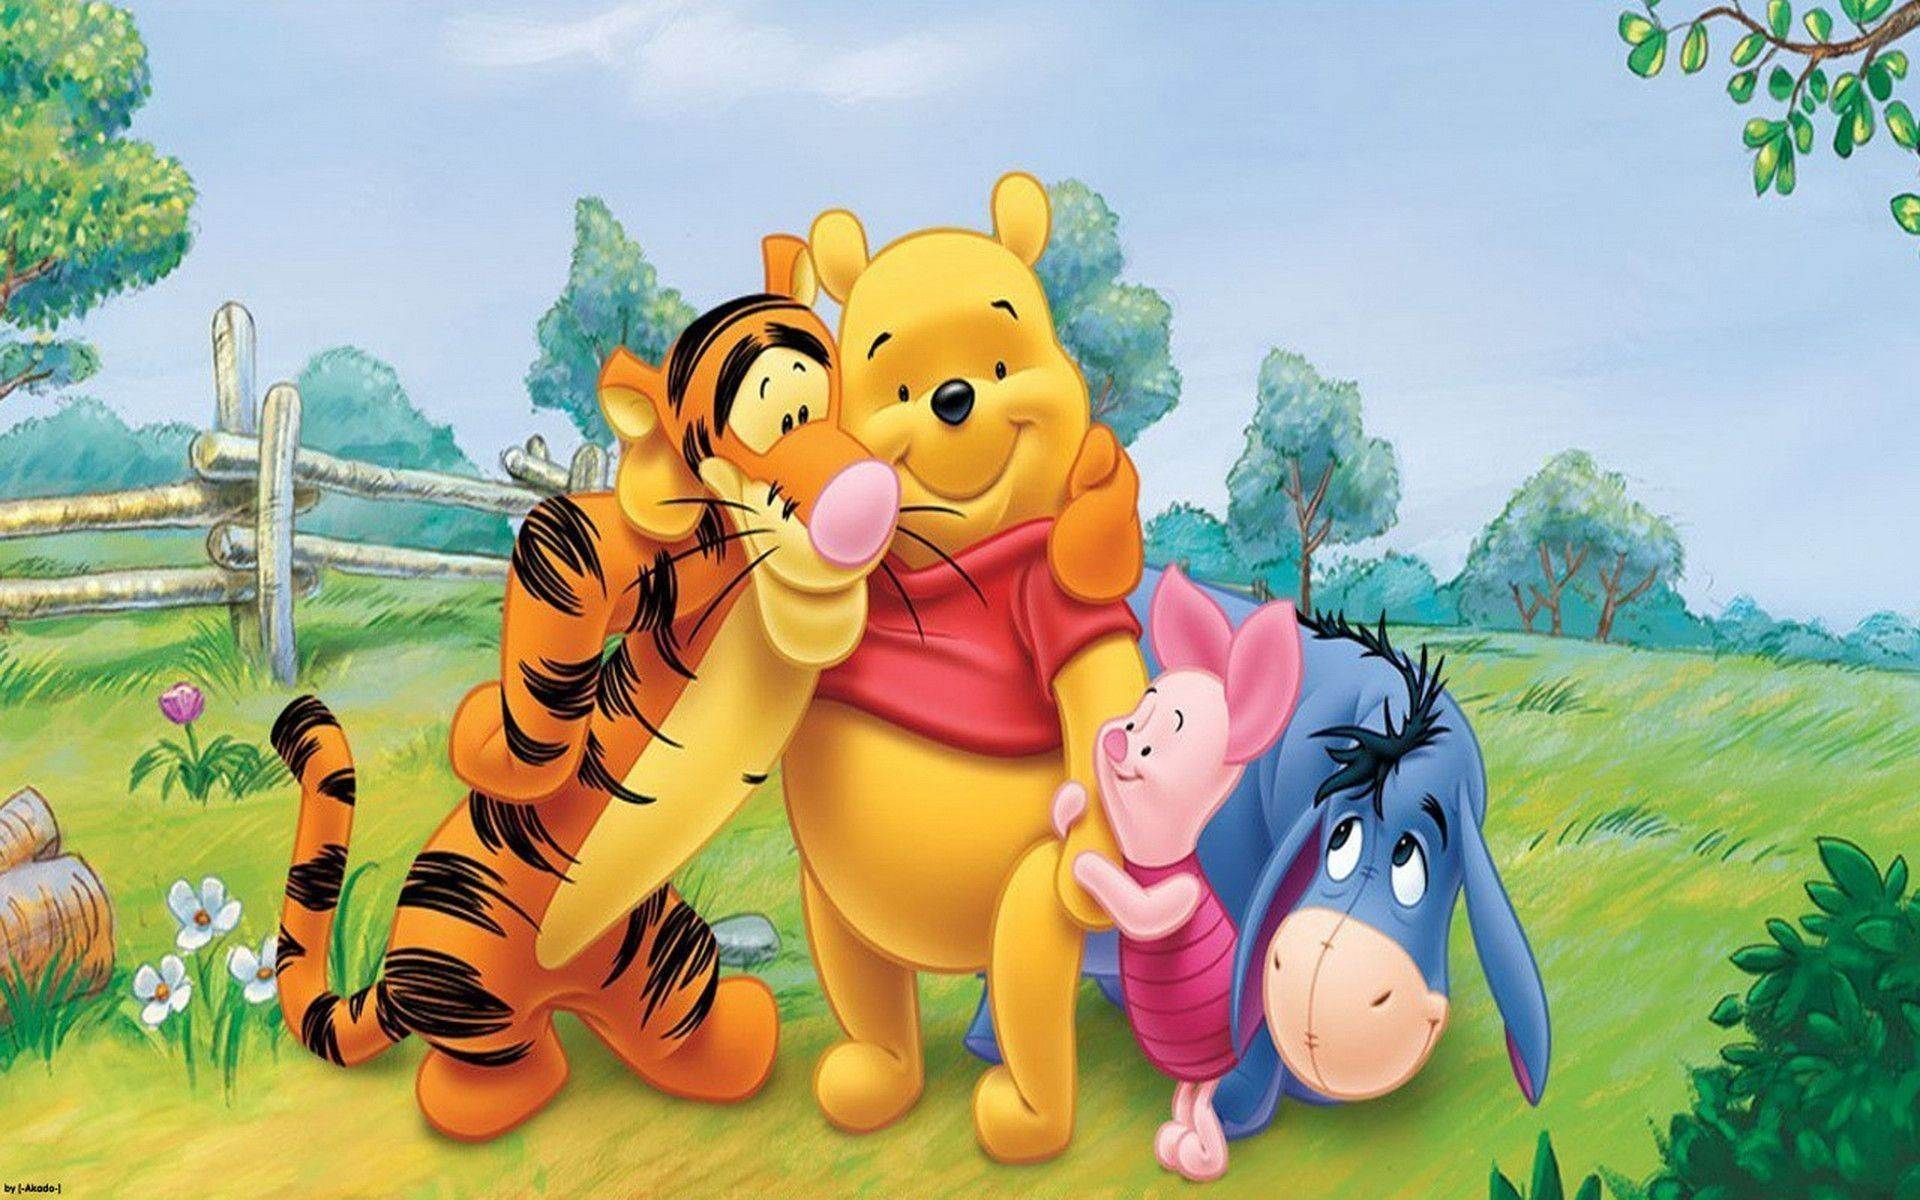 Tigger, Winnie-the-Pooh animation, Winnie the Pooh and friends wallpapers, Disney, 1920x1200 HD Desktop